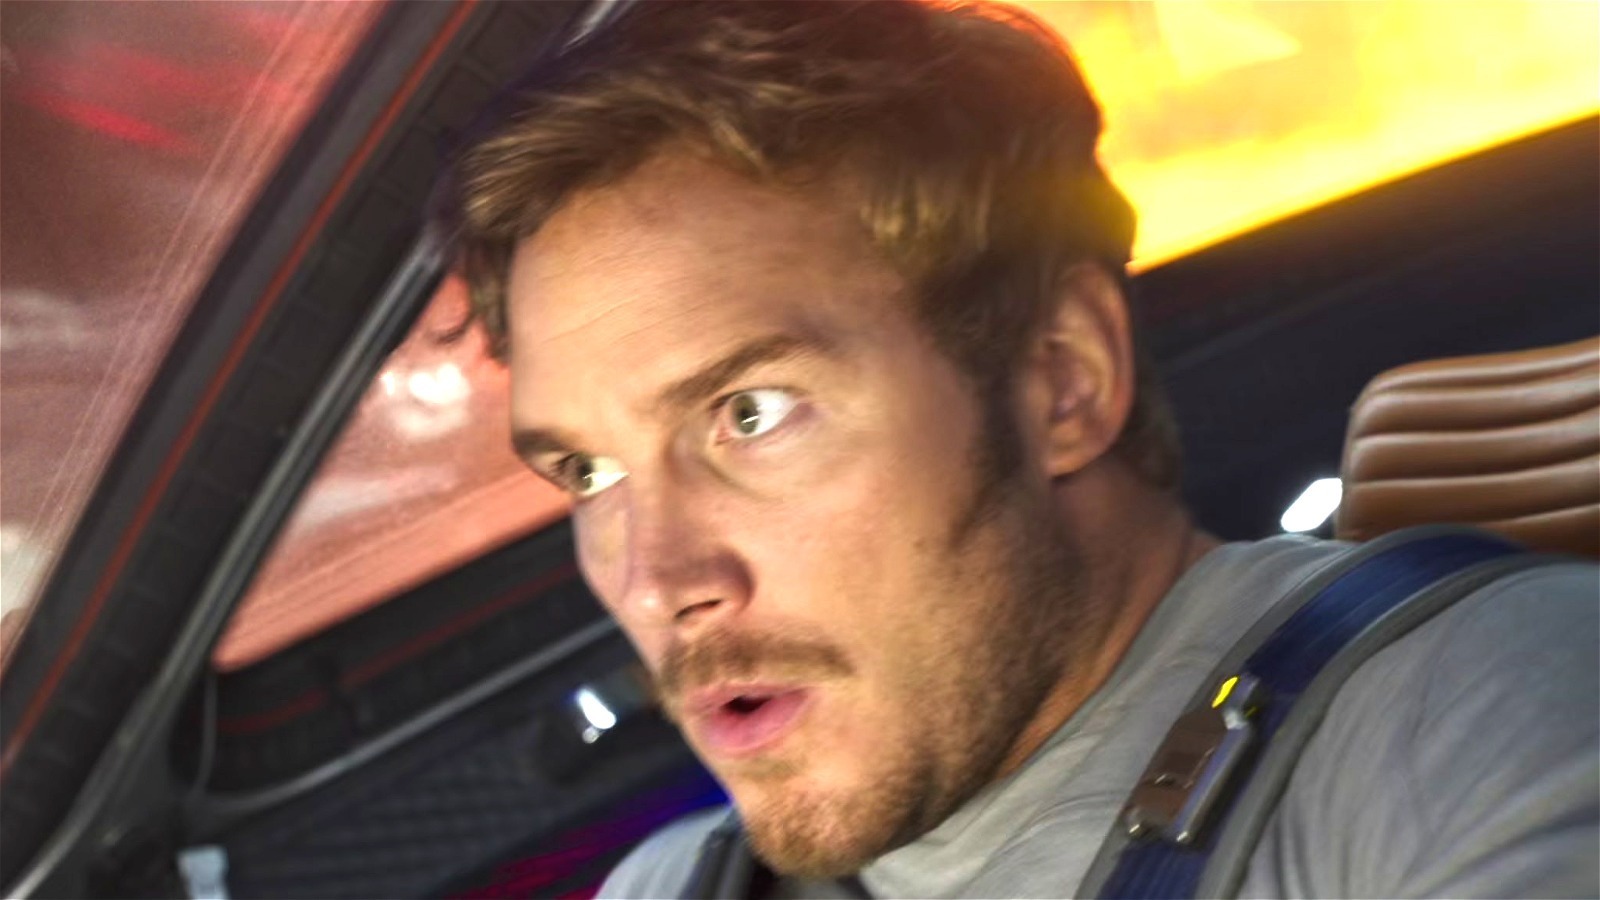 Guardians of the Galaxy 3 What happens to Star-Lord's Celestial